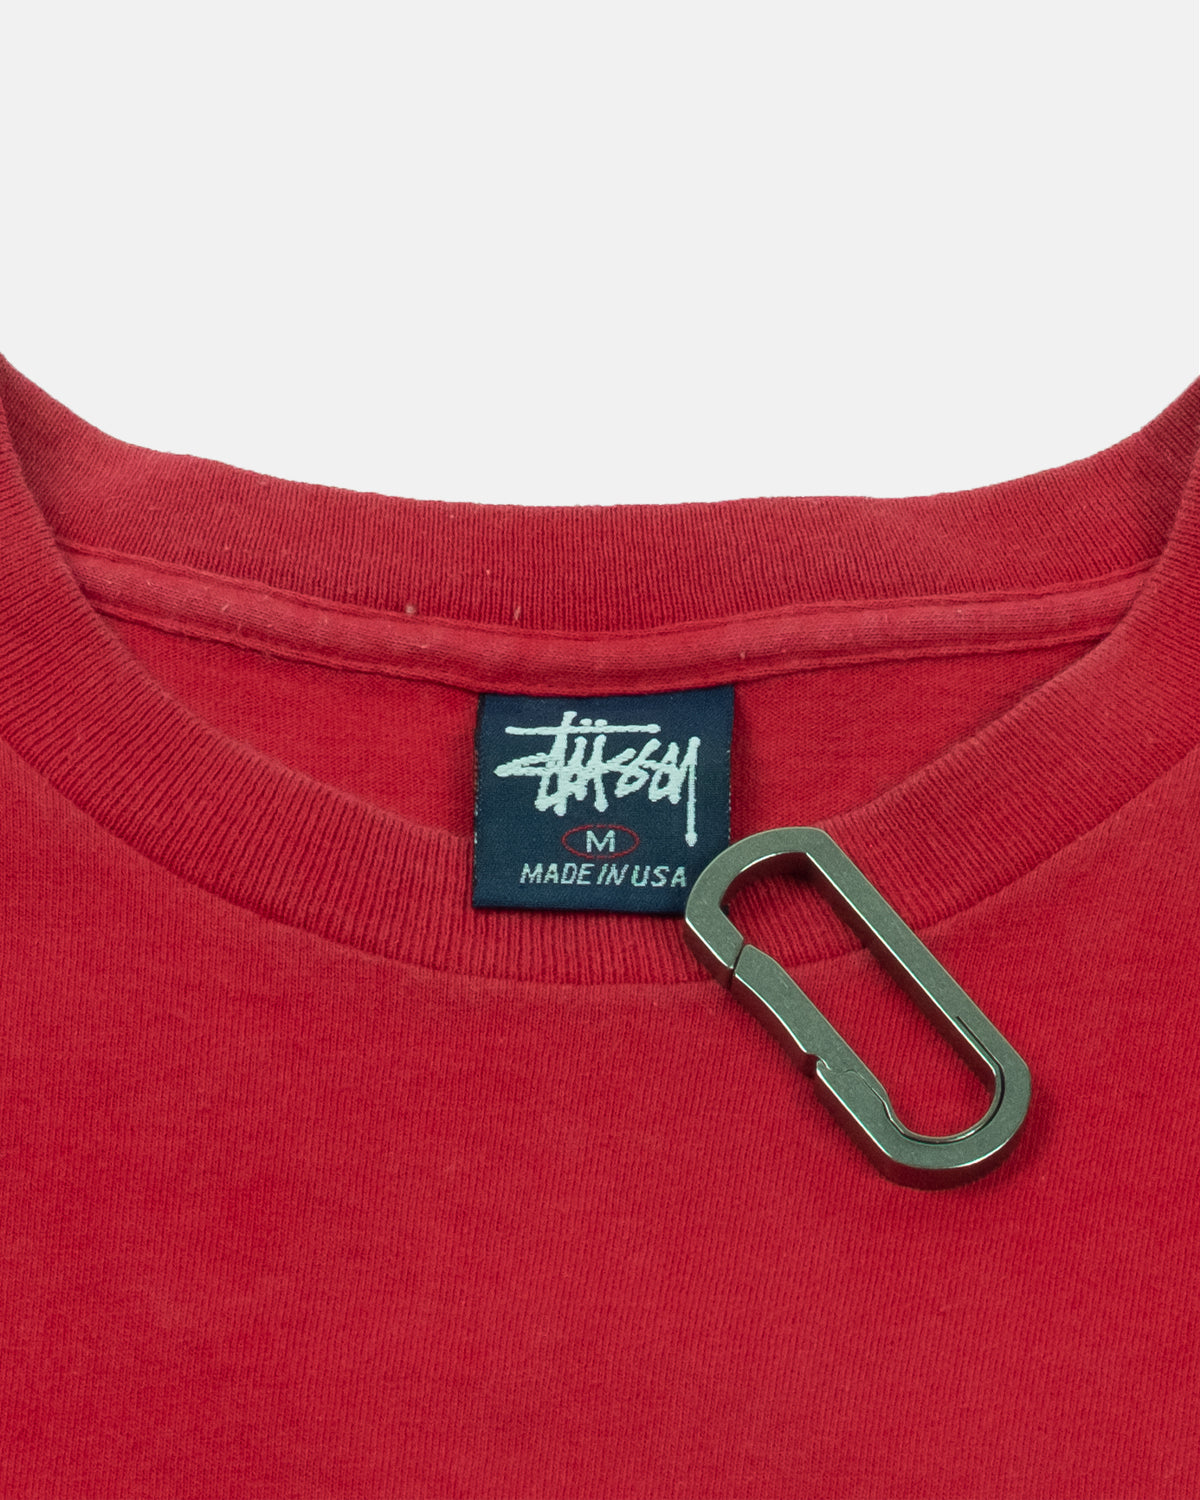 1990s/2000s Stüssy Red House T-Shirt